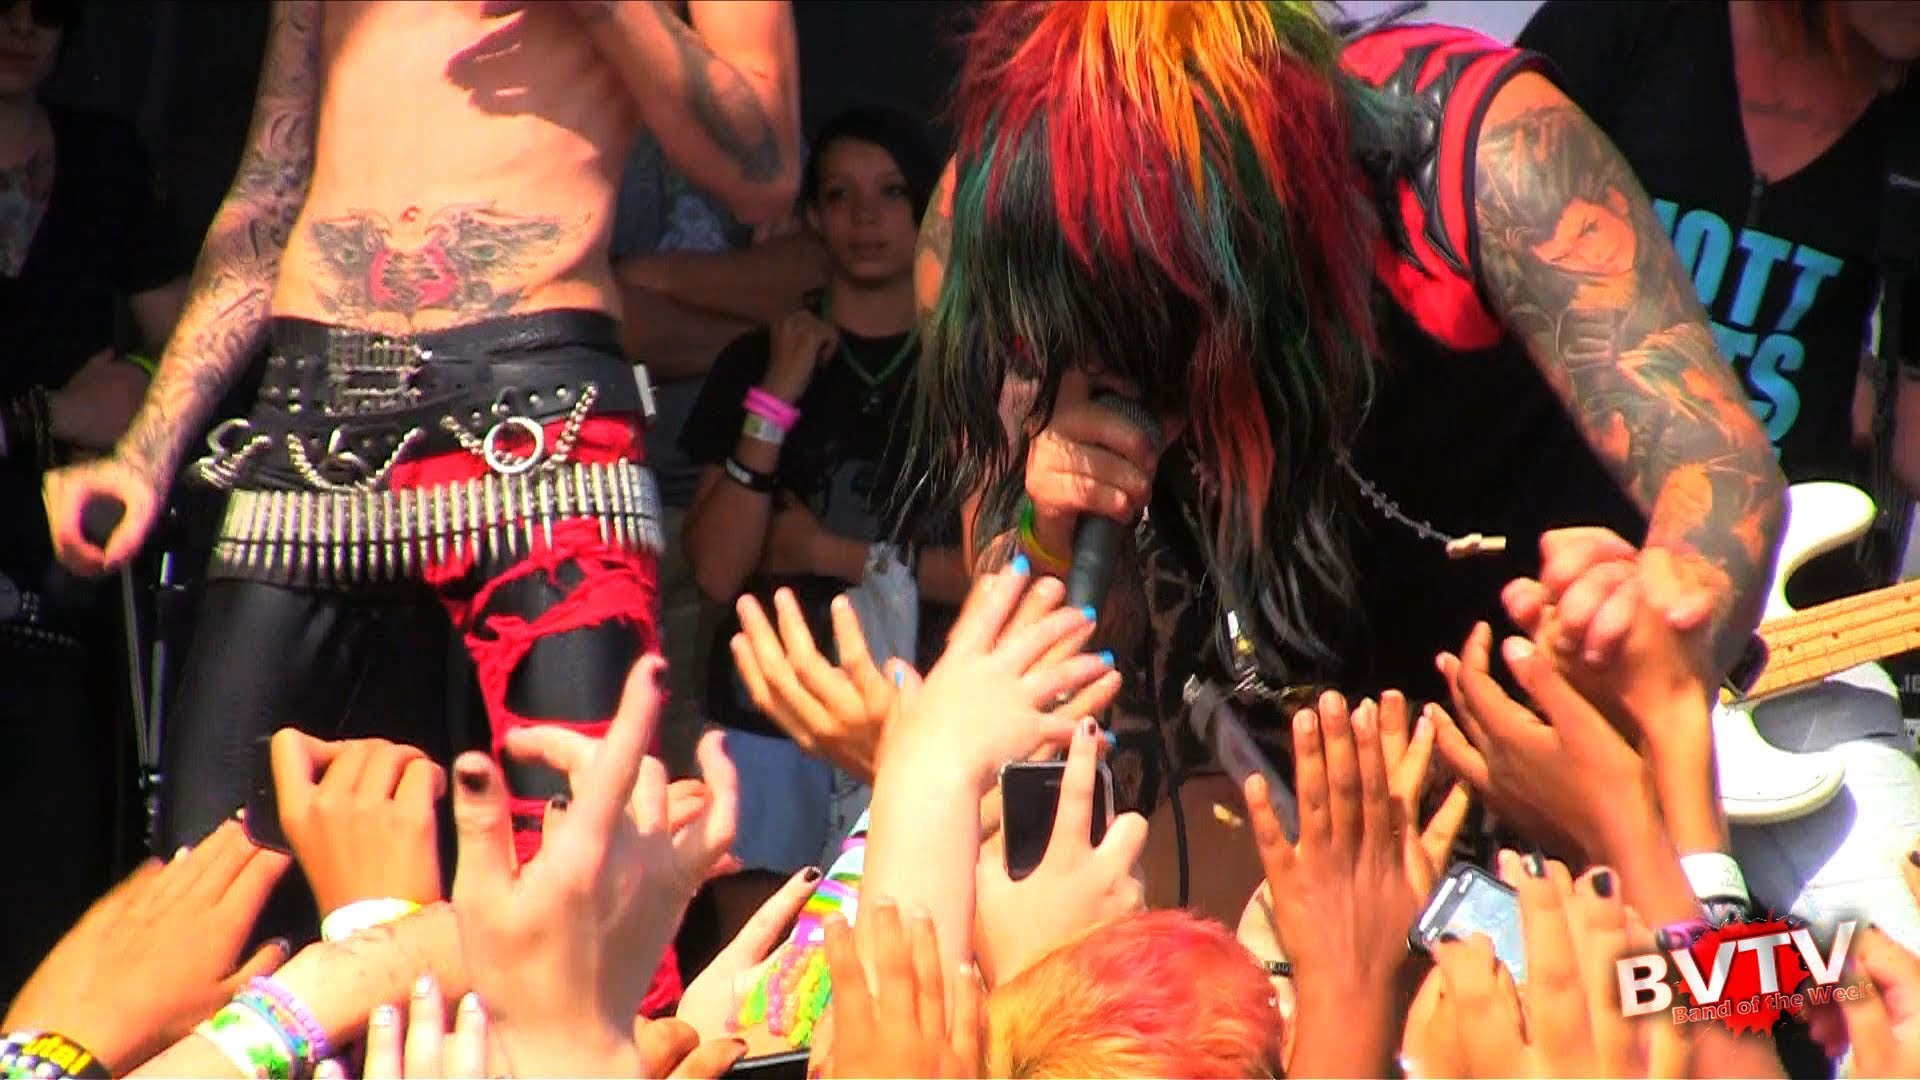 1920x1080 Blood On The Dance Floor - "Bewitched" Live in HD! at Warped Tour 2011 -  YouTube